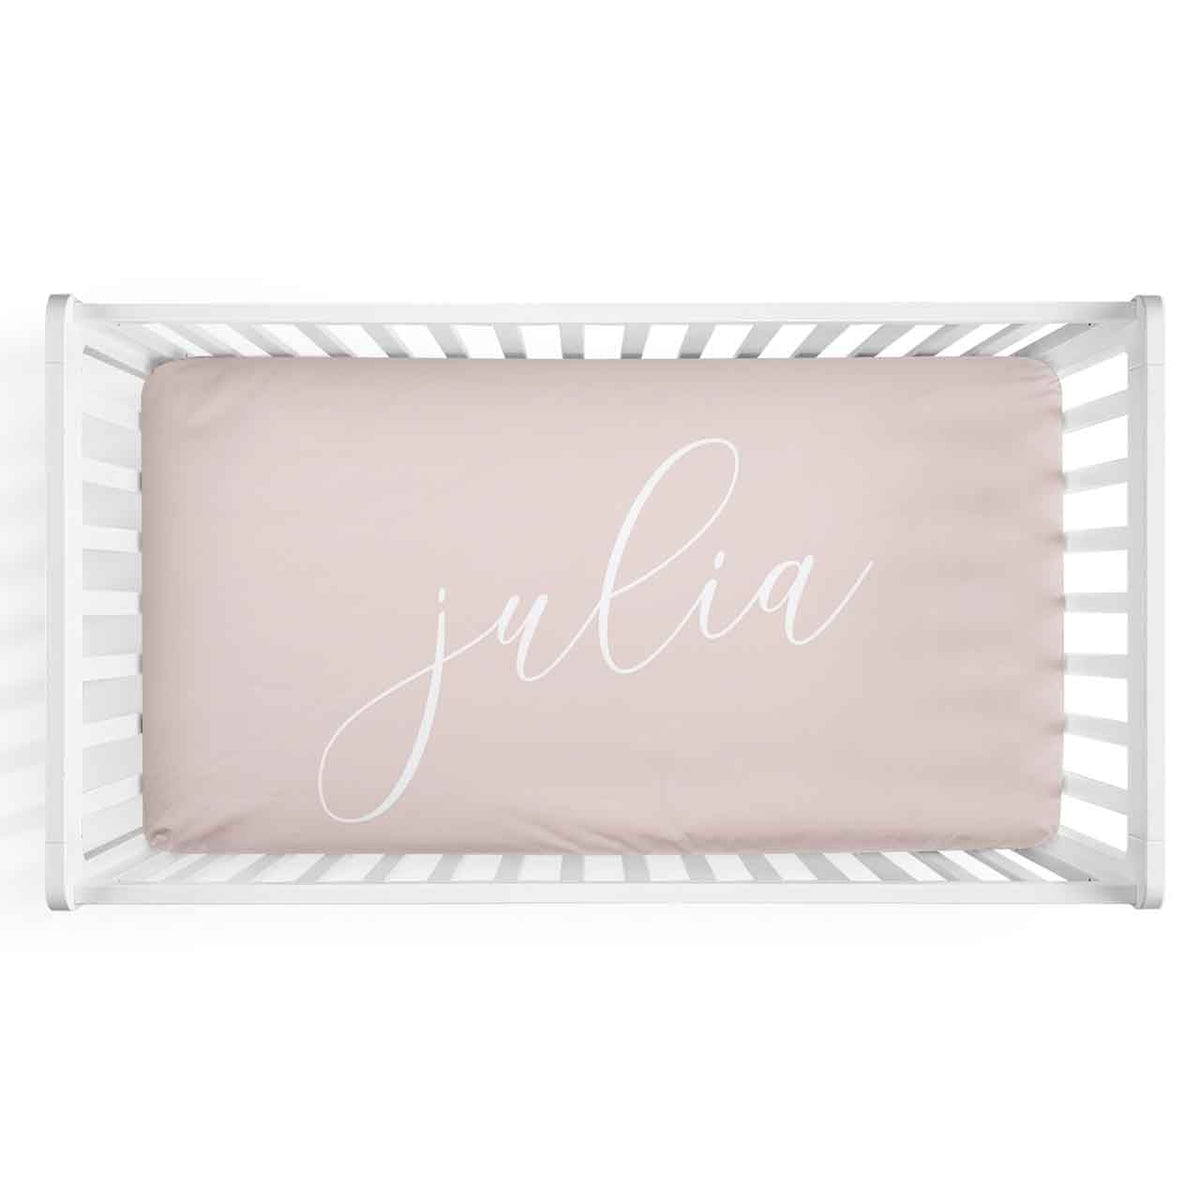 Personalized Baby Name Blush Color Jersey Knit Crib Sheet in Centered Script Style